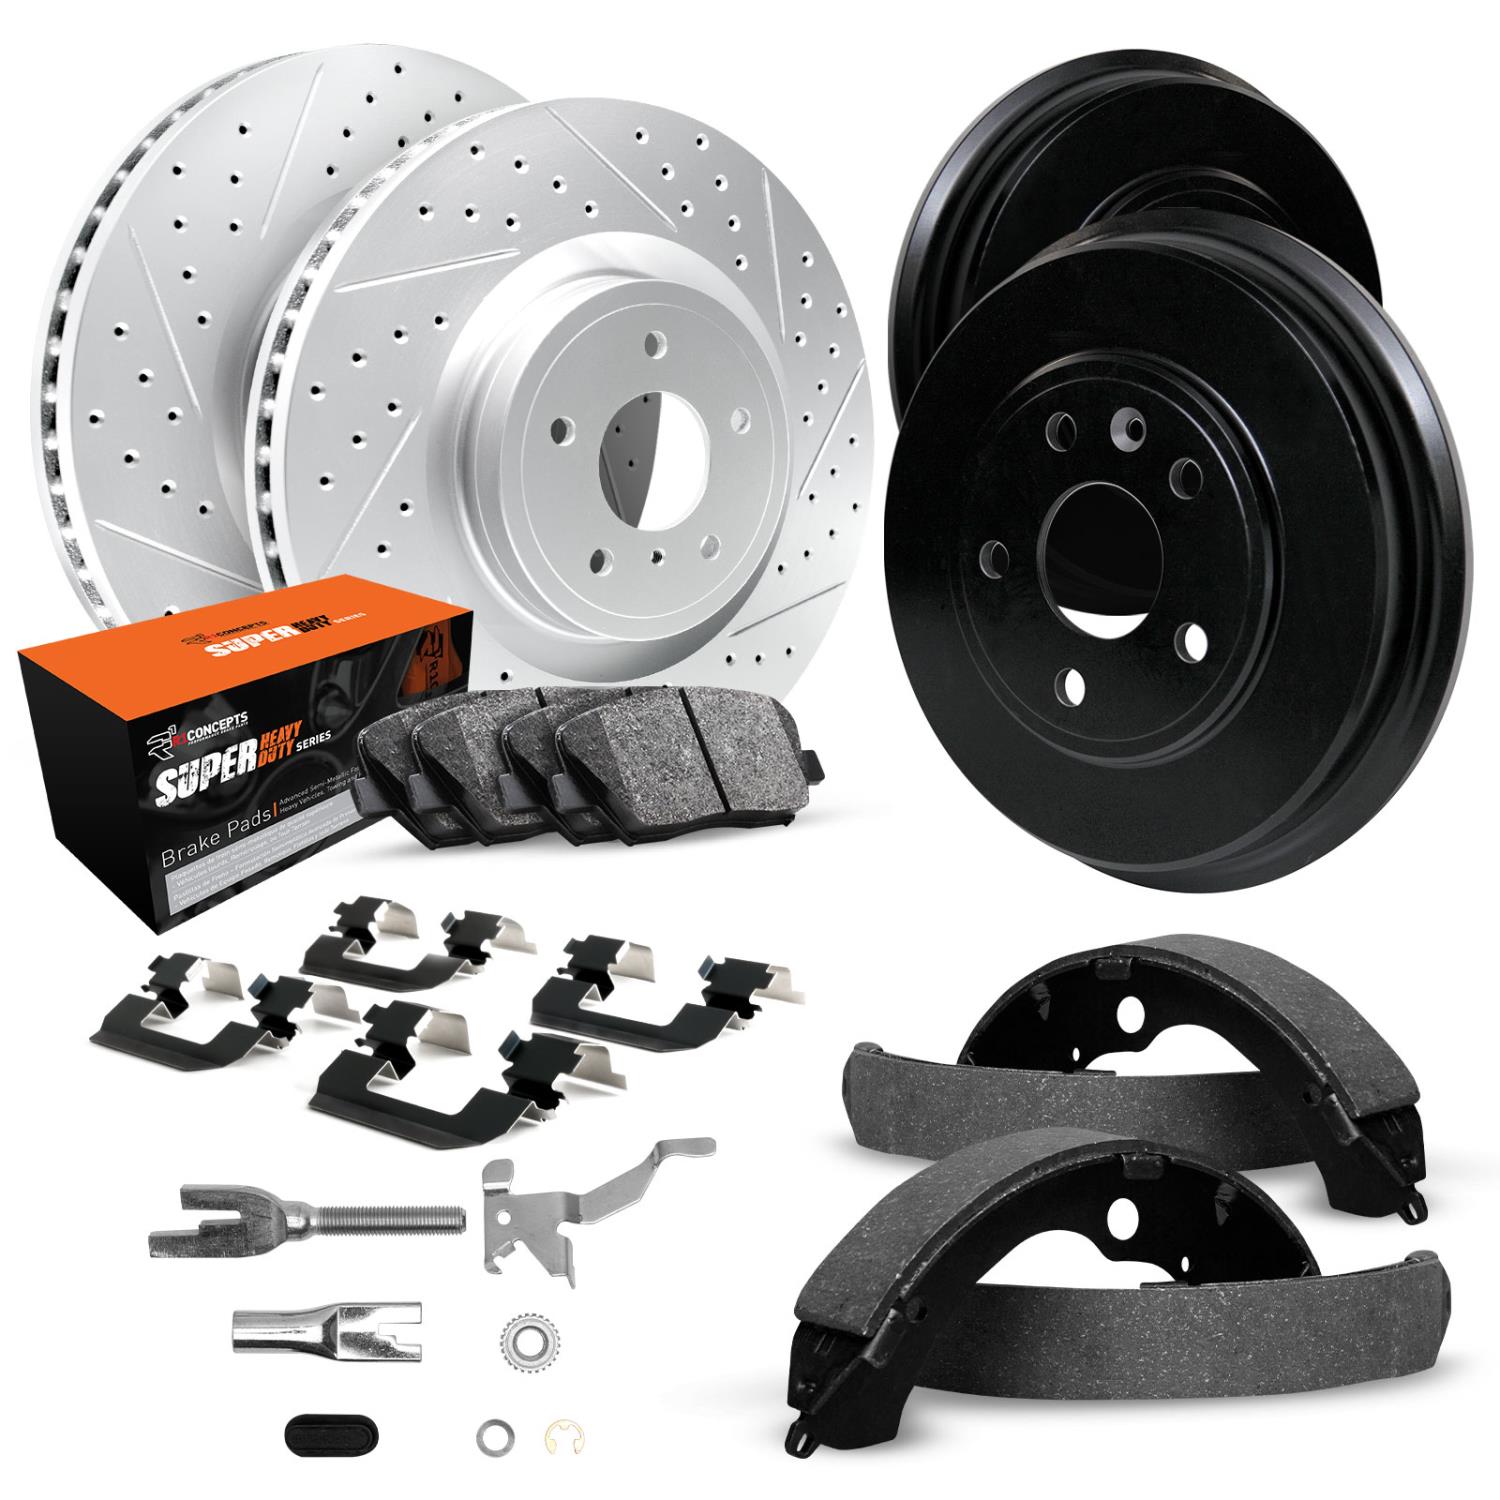 GEO-Carbon Drilled/Slotted Rotors/Drums w/Super-Duty Pads/Shoes/Hardware/Adjusters, 2000-2002 Mopar, Position: Front/Rear